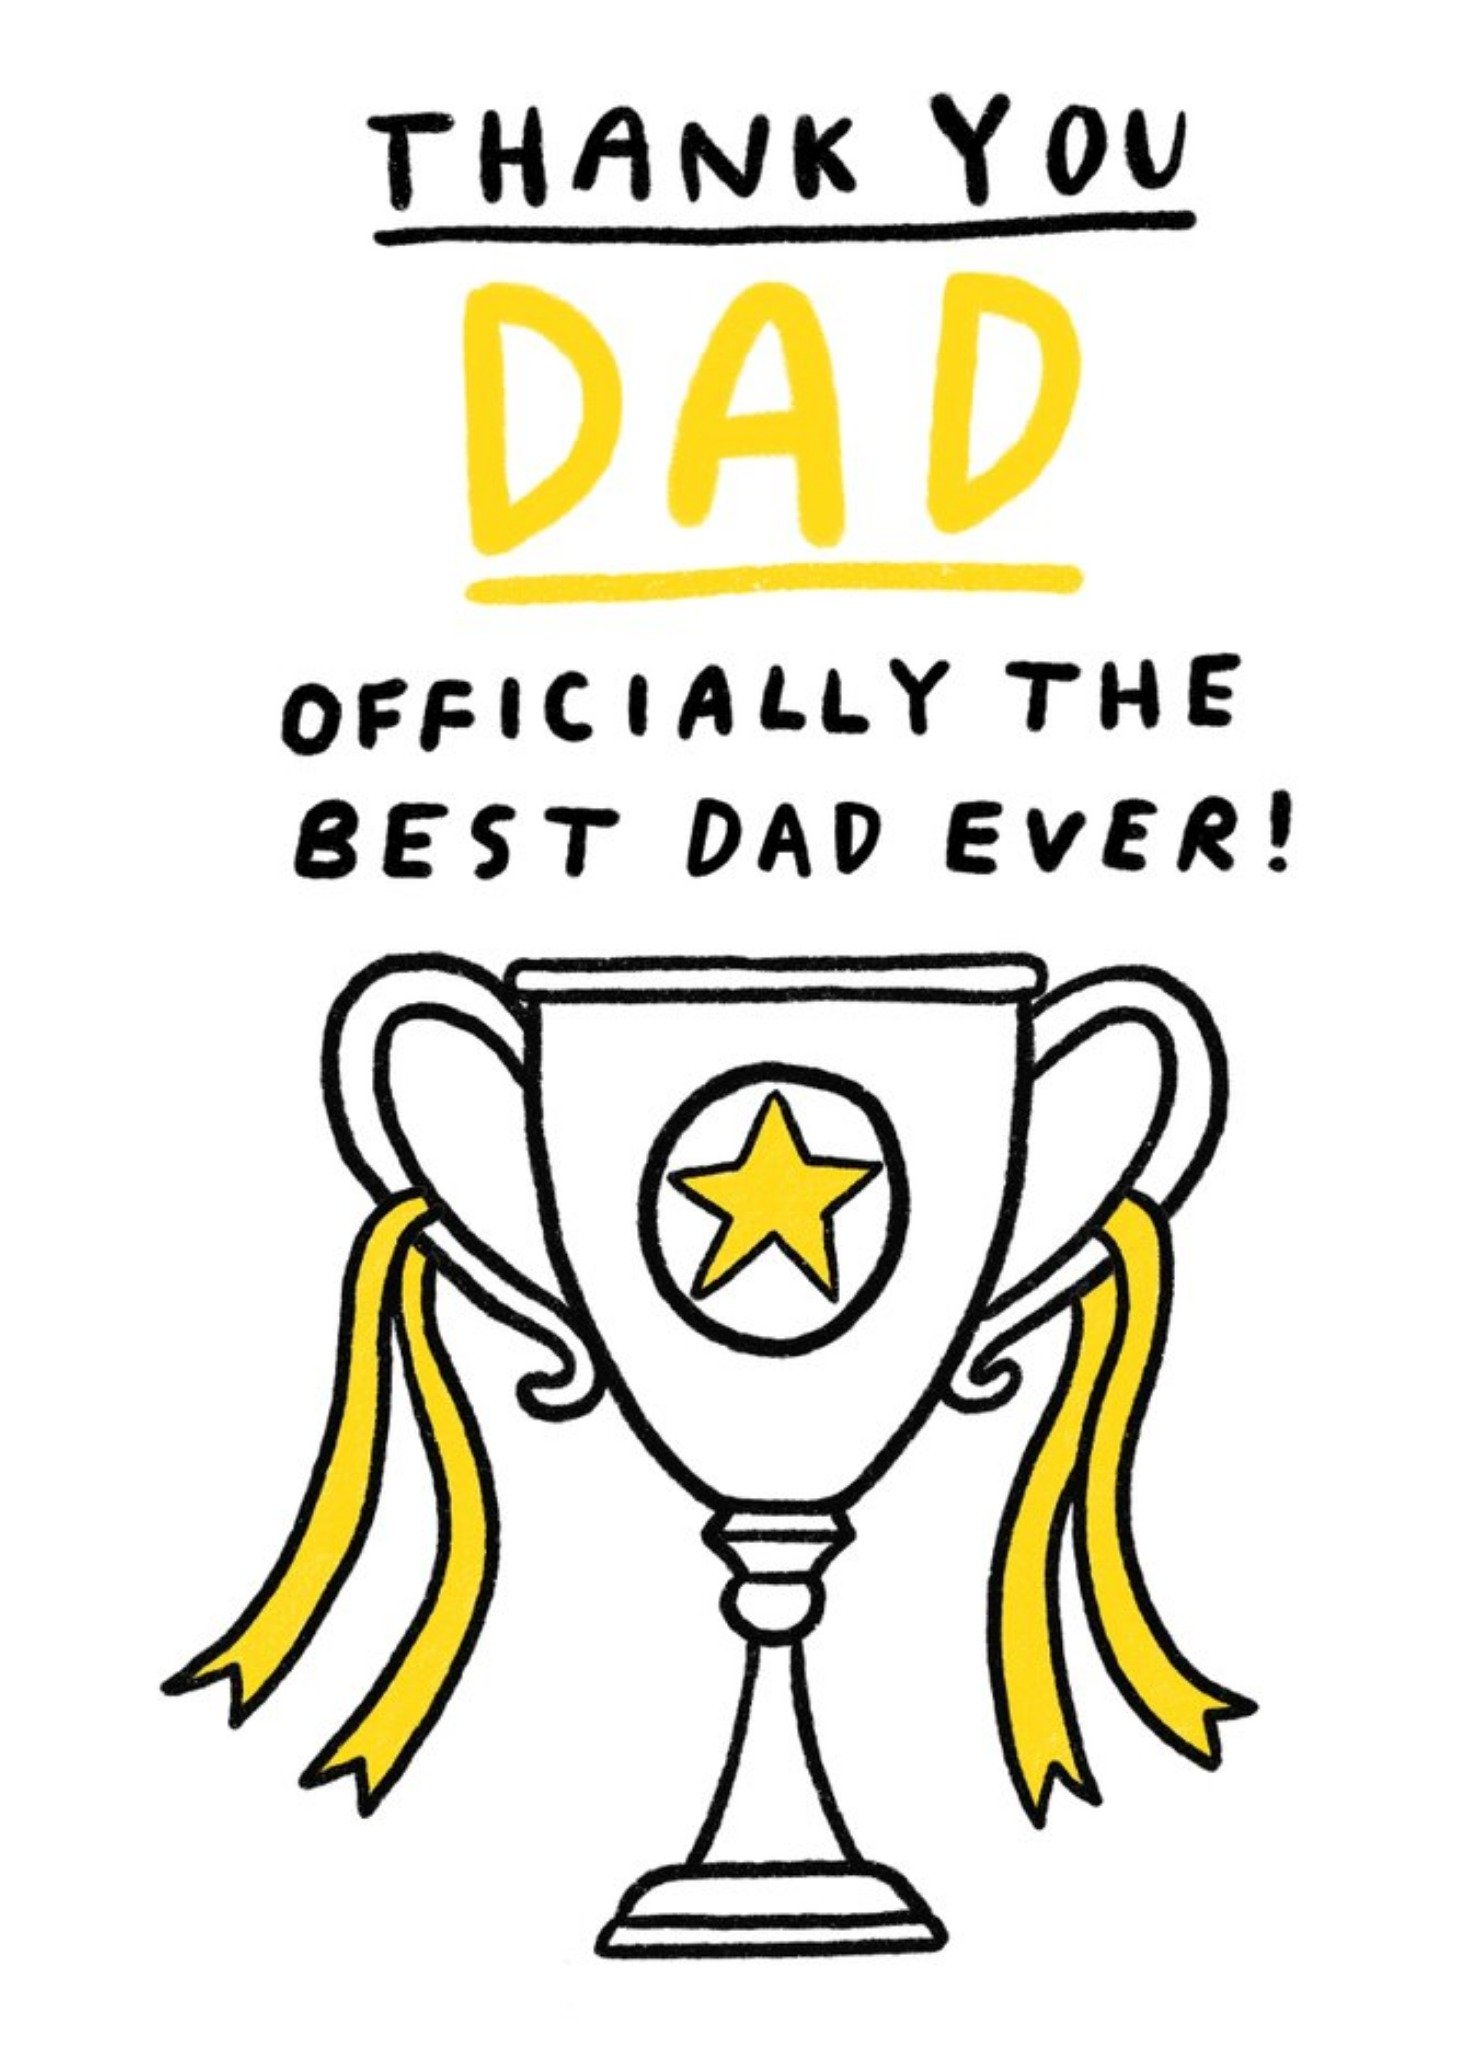 Moonpig Icially The Best Dad Ever Thank You Card Ecard